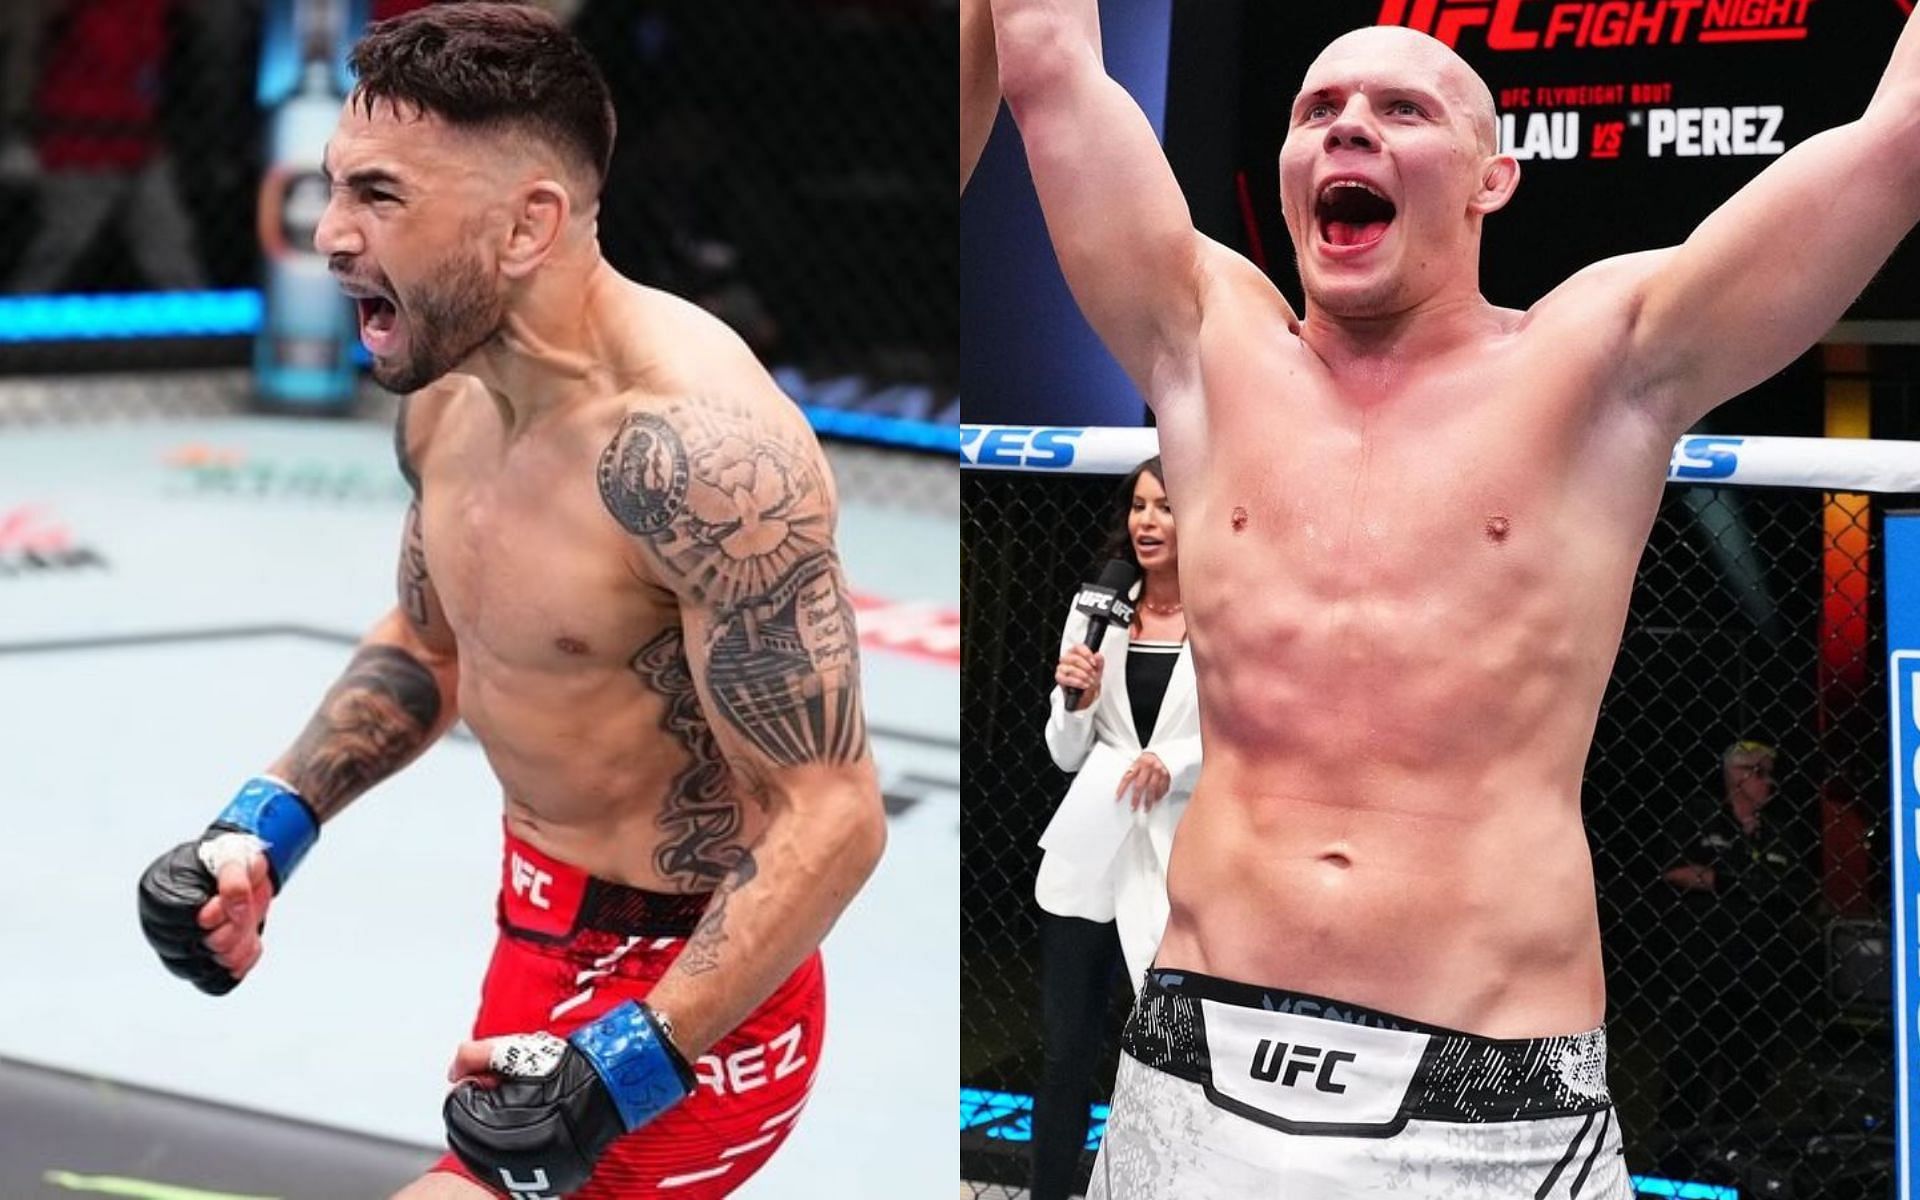 Alex Perez (left) and Bogdan Guskov (right) emerged victorious in the headlining matches of UFC Vegas 91 [Images courtesy: @alexperezmma and @bogdancarevich on Instagram]